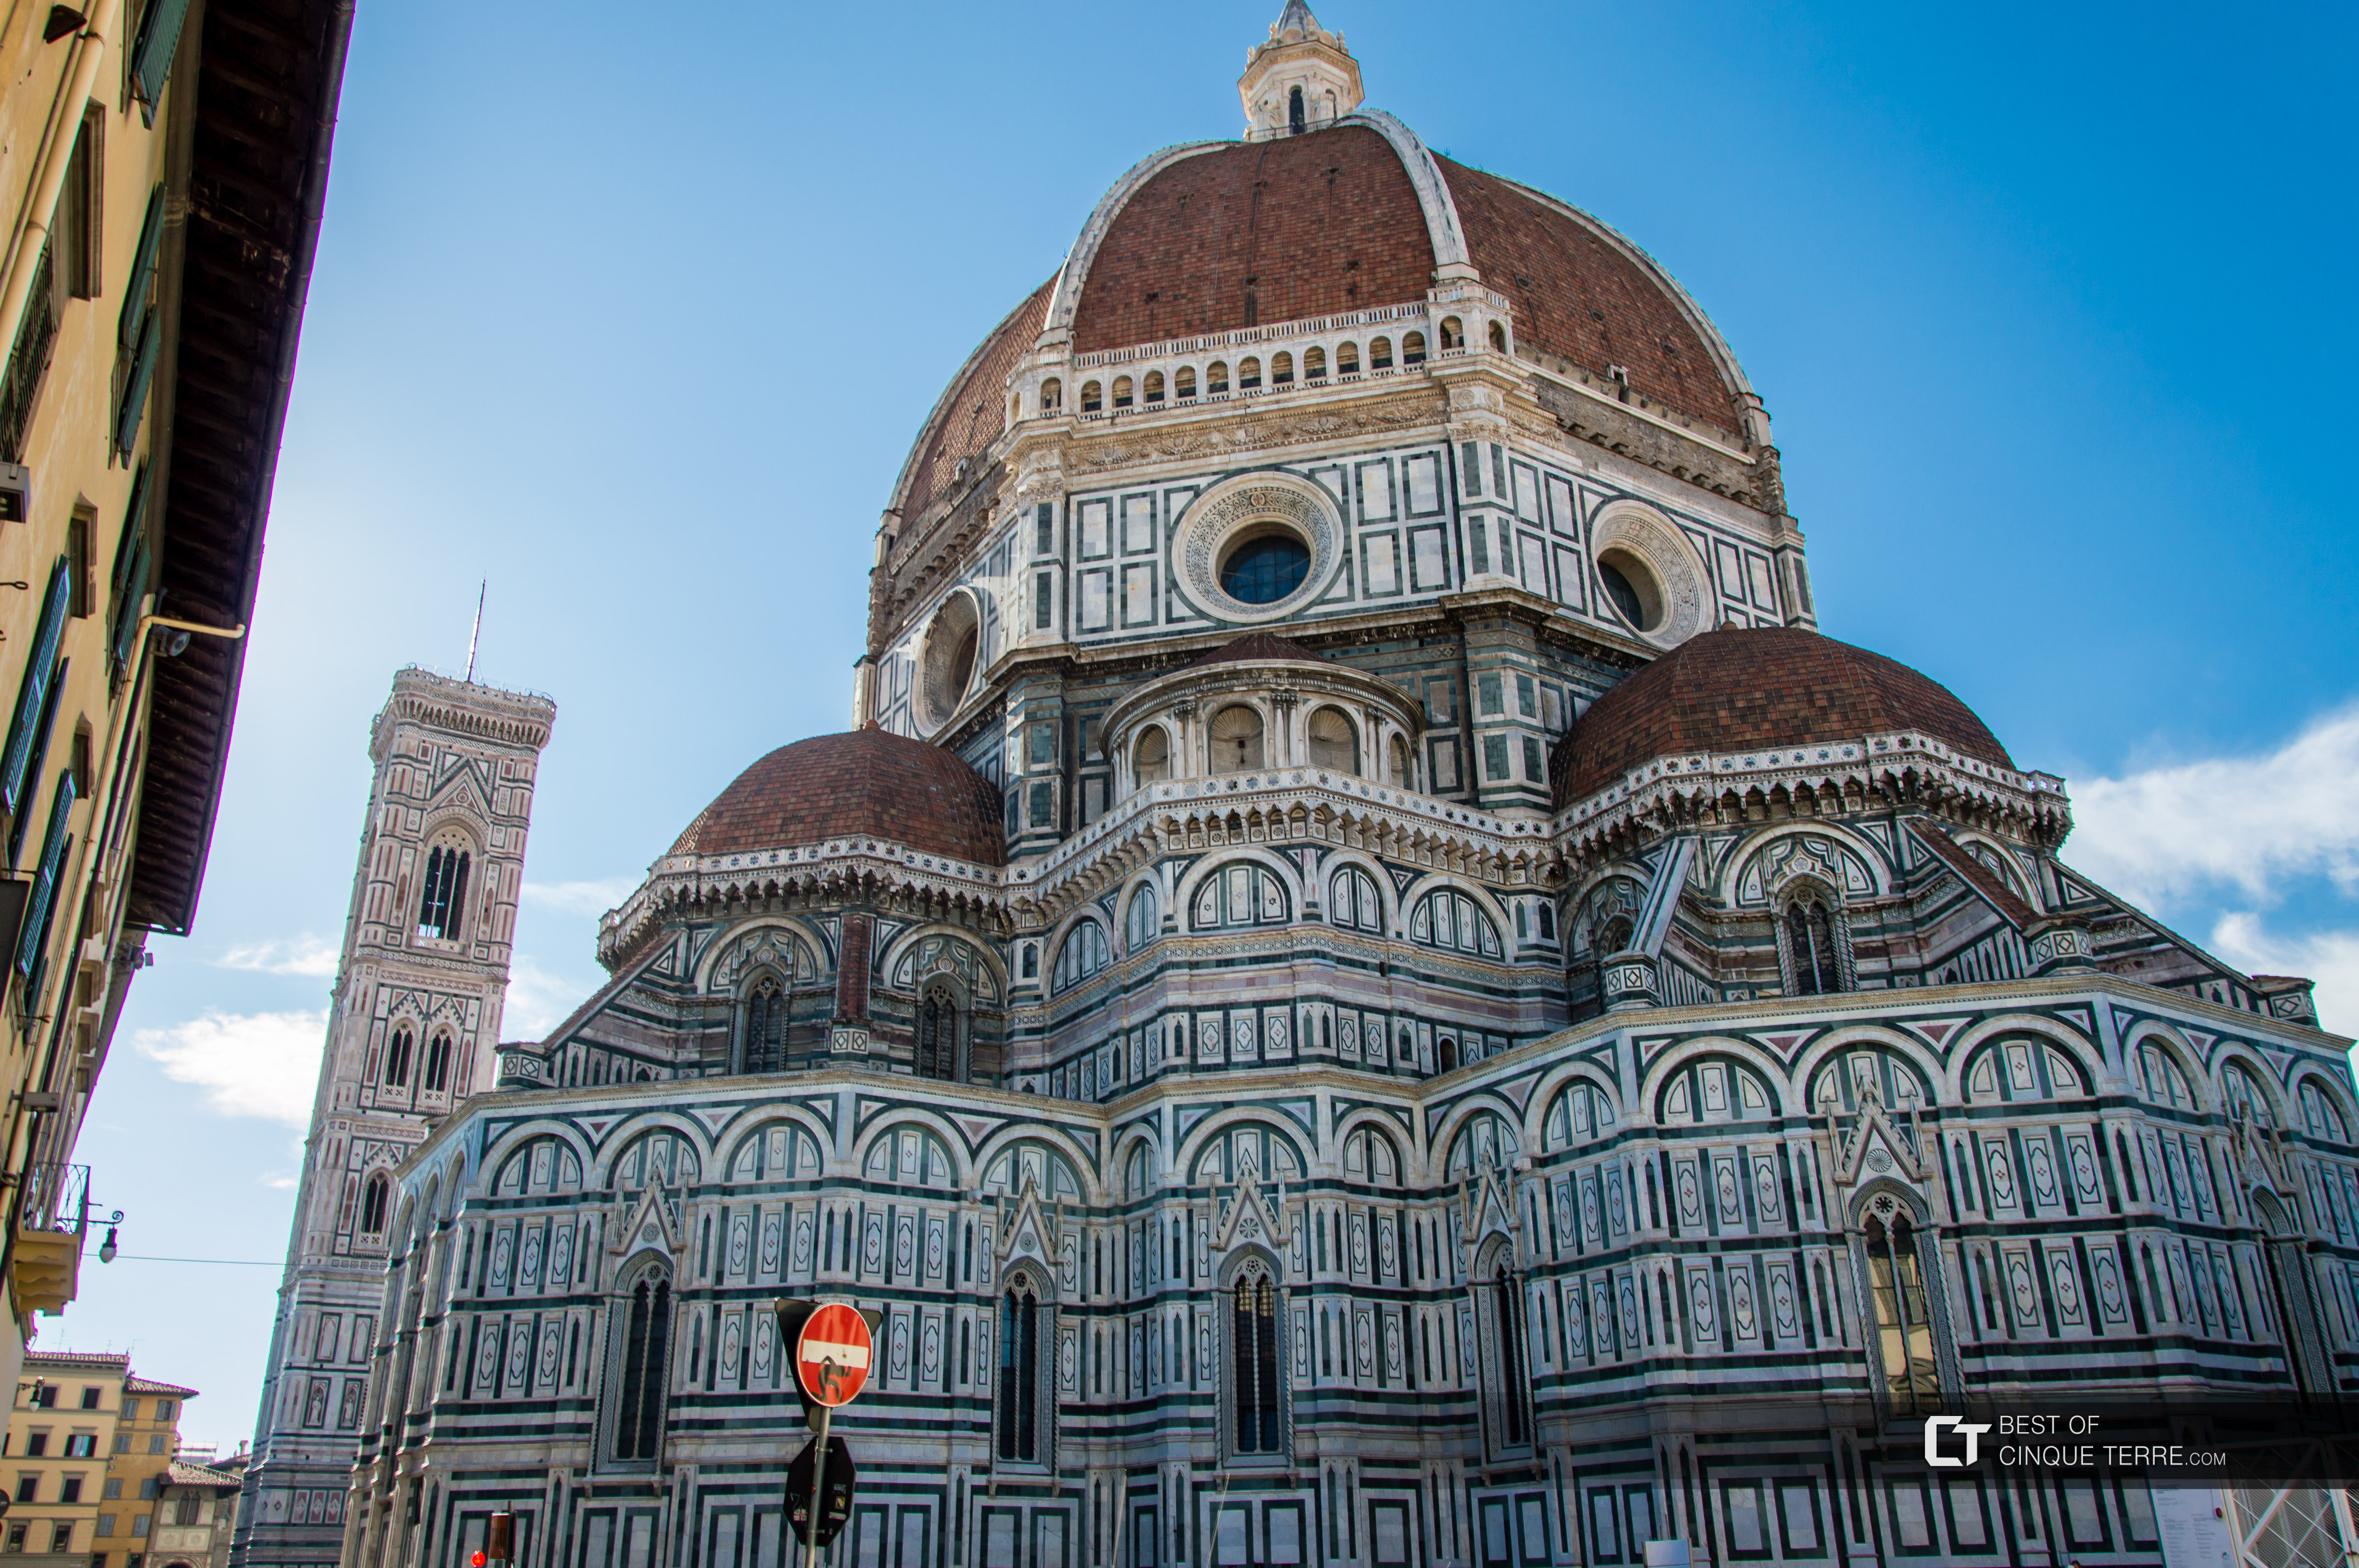 The dome of the Cathedral of Santa Maria del Fiore and Giotto's Bell tower, Florence, Italy